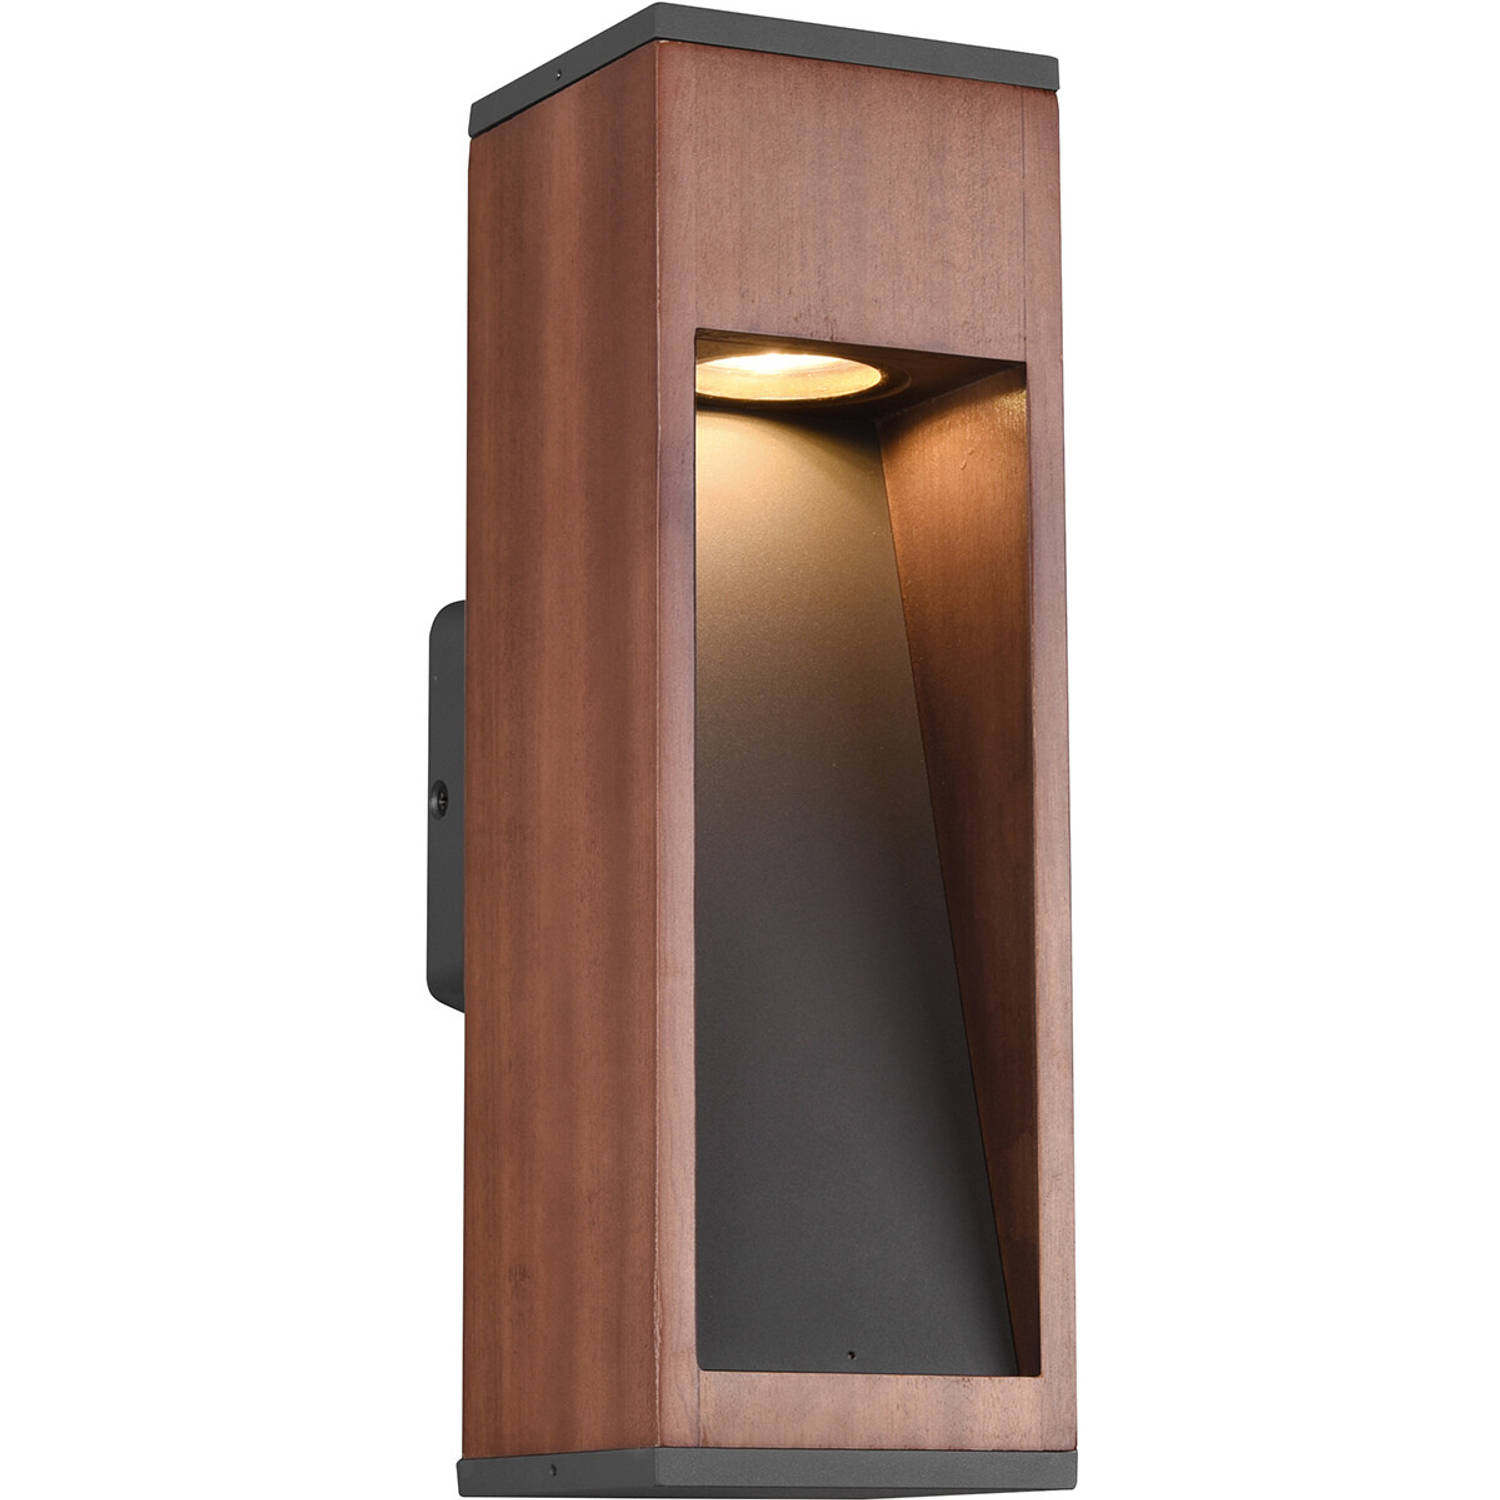 Led Tuinverlichting - Wandlamp Buitenlamp - Trion Enico - Gu10 Fitting - Rechthoek - Hout - Natuur H